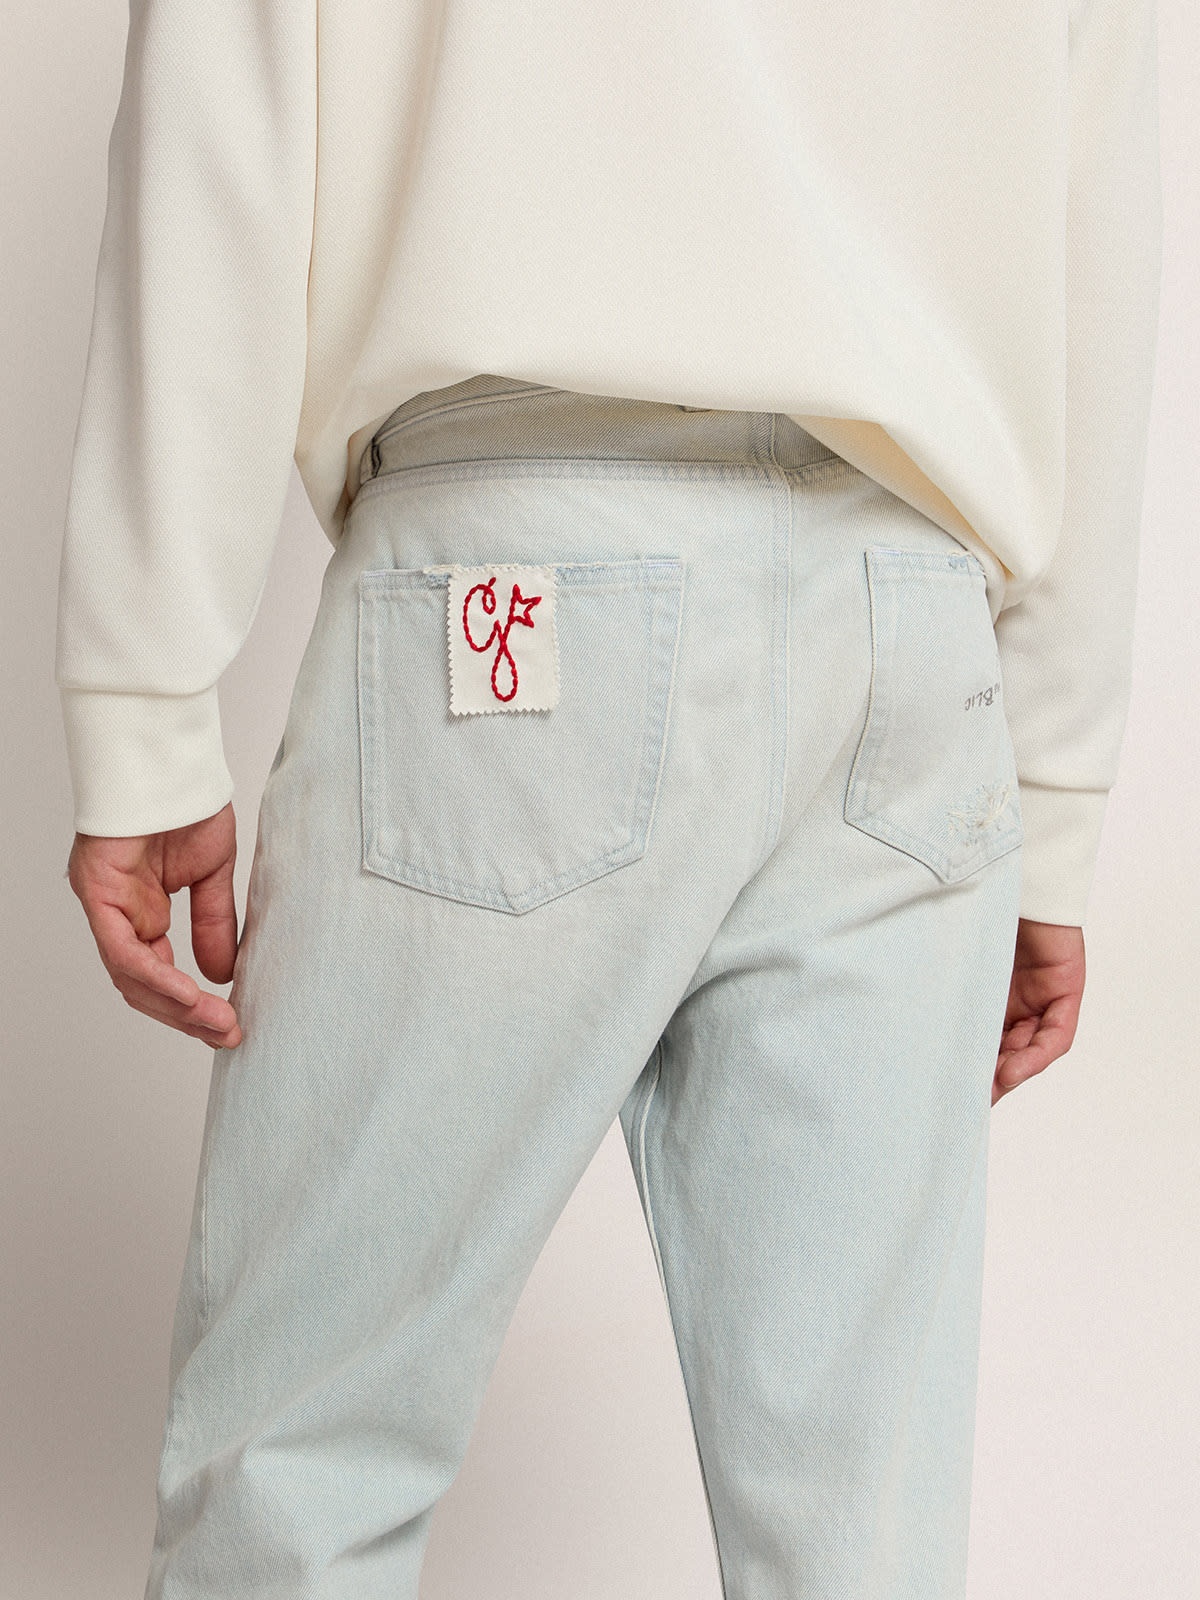 Men's bleached jeans with distressed treatment - 4